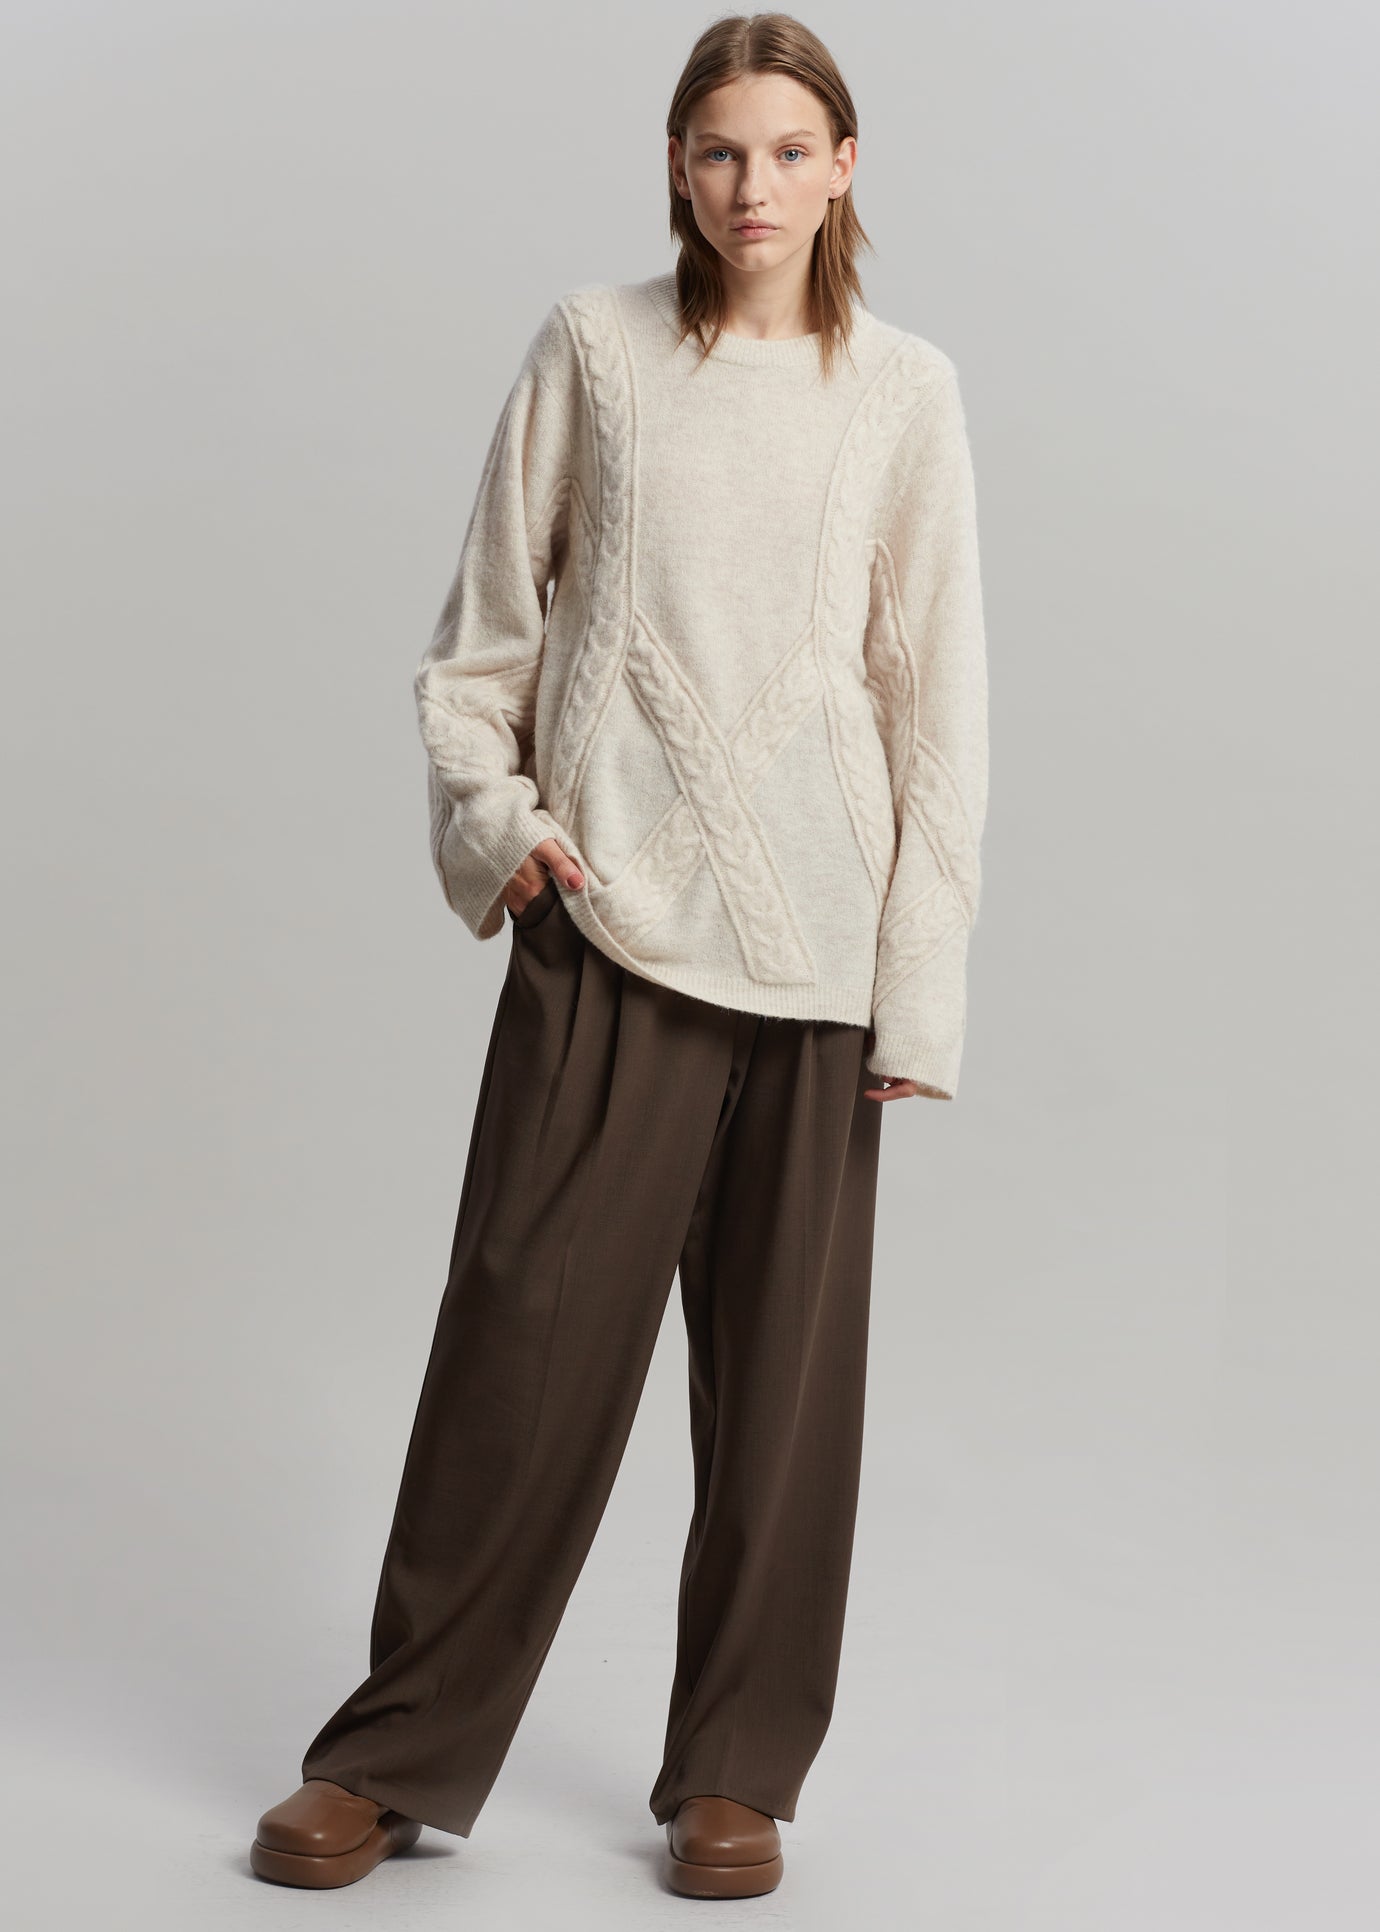 The Garment Courchevel Cable Knit - Oatmeal - 1